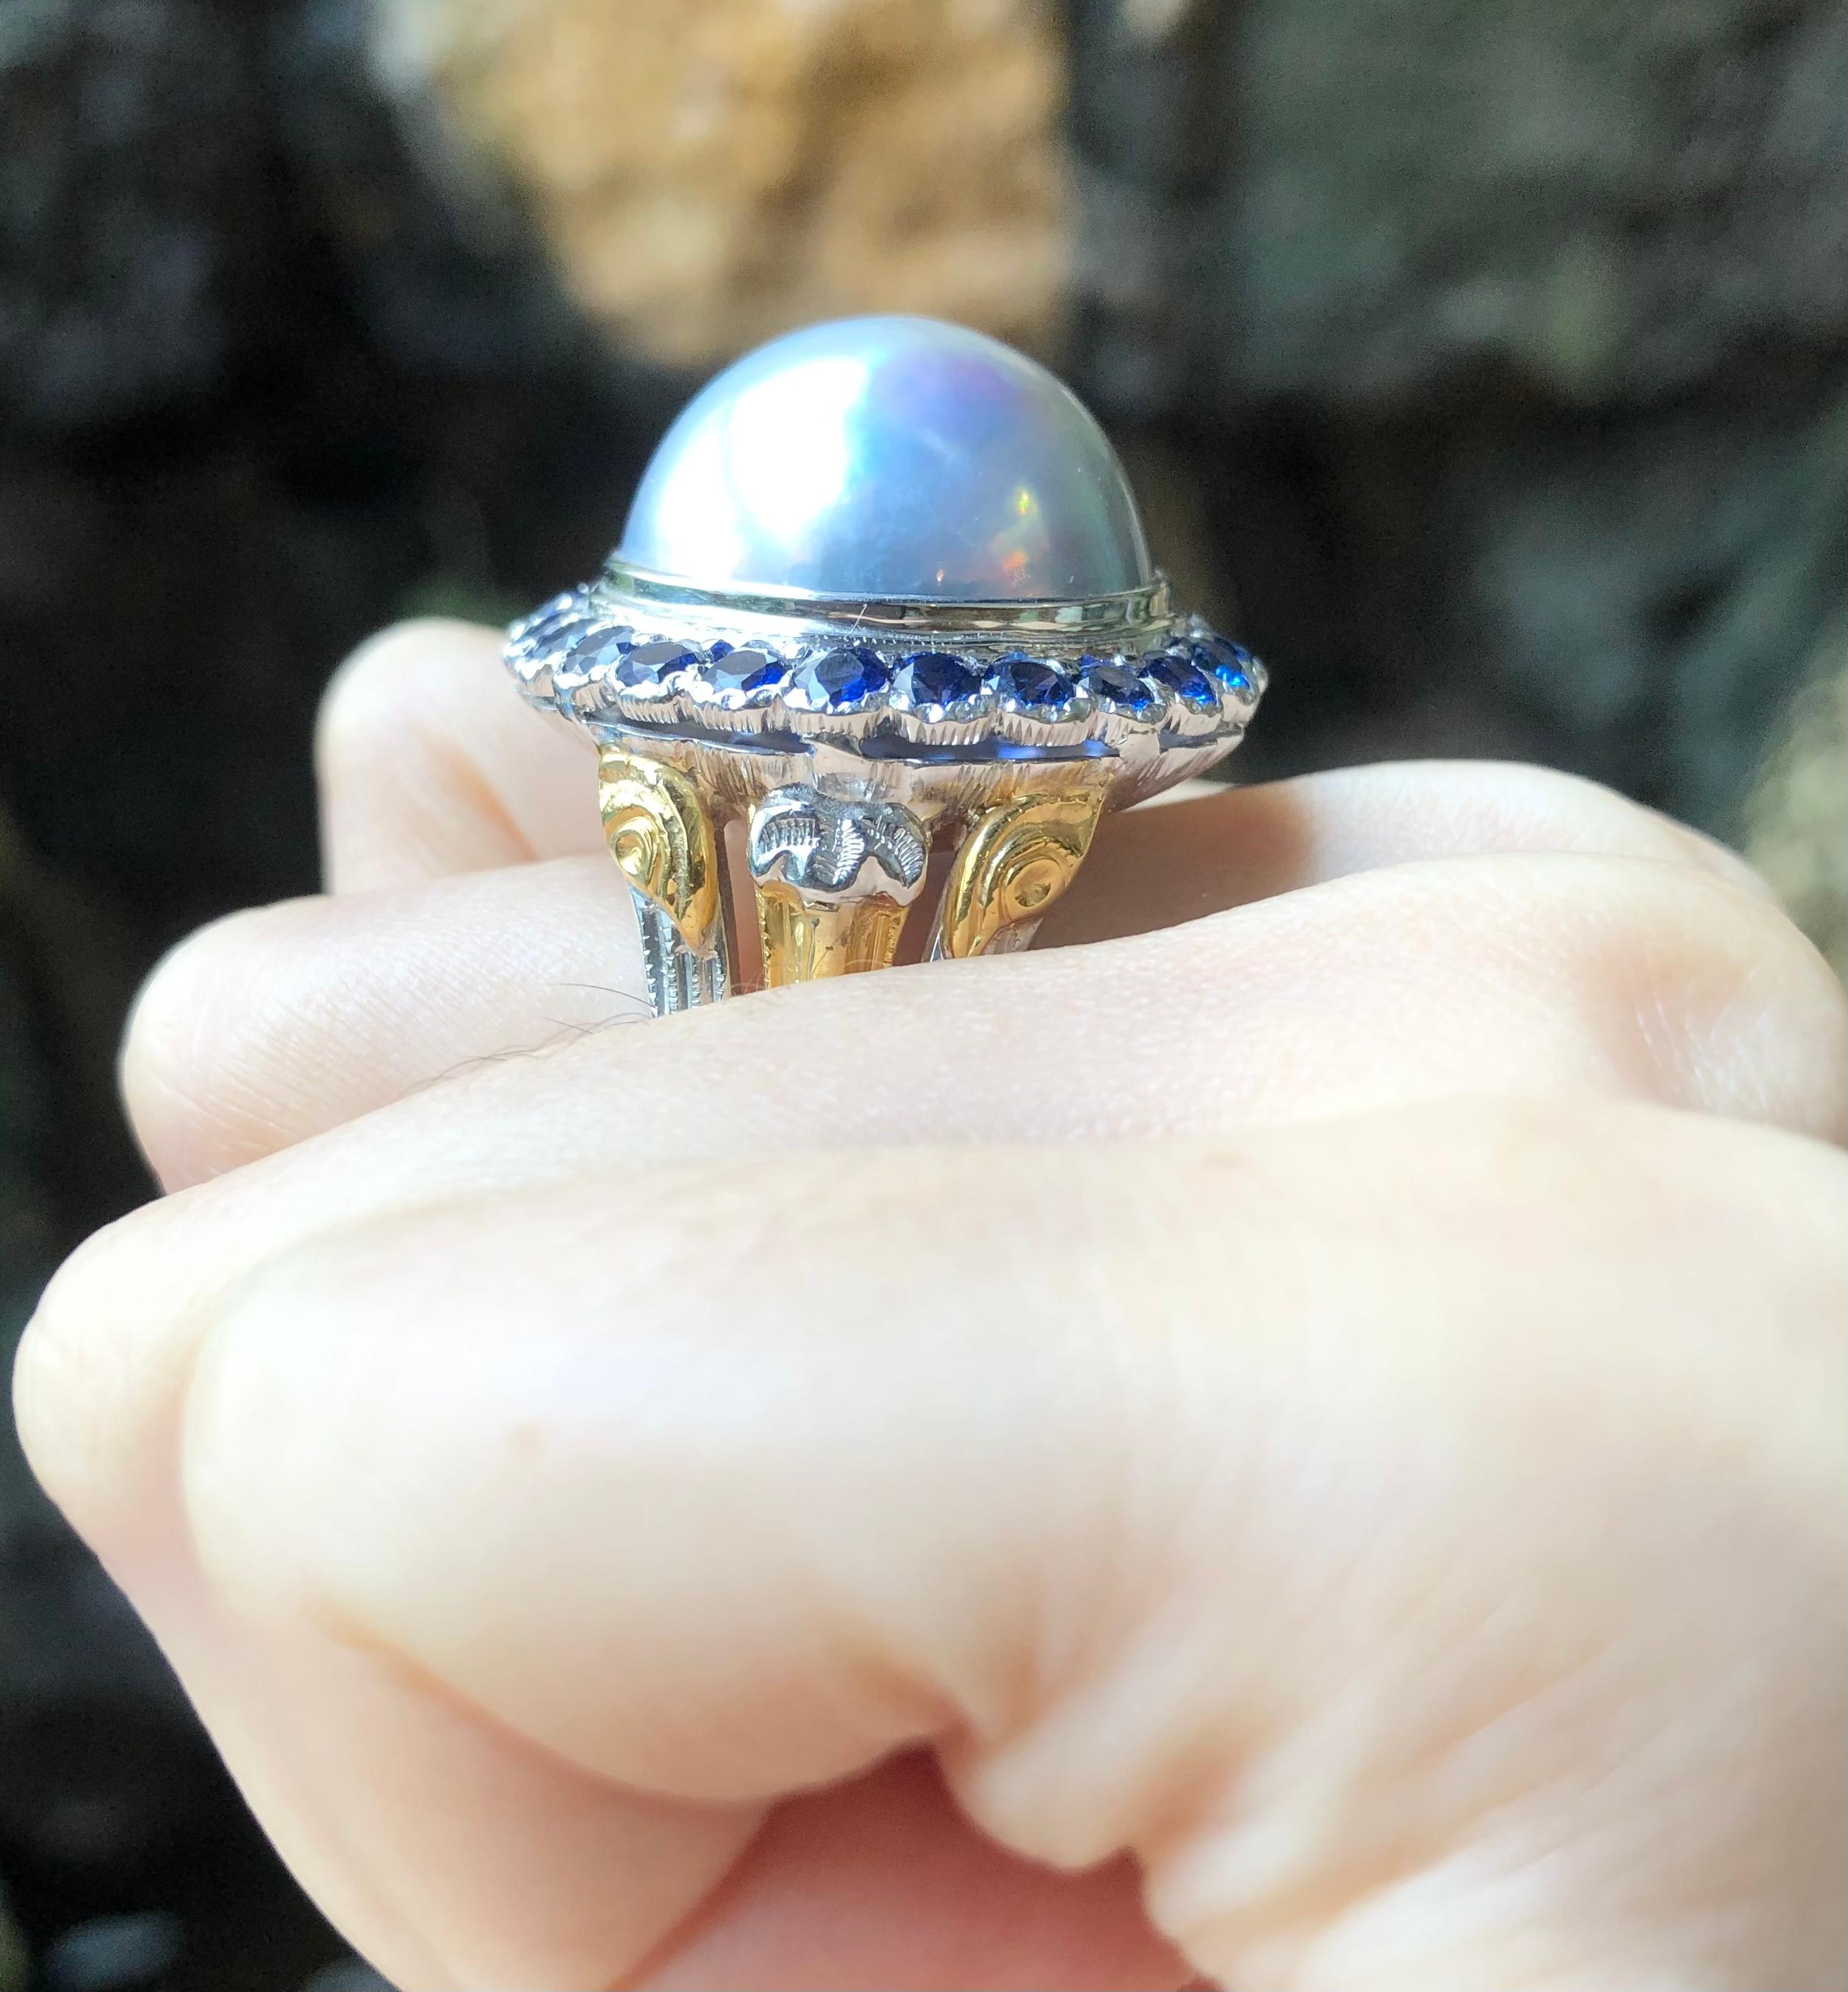 Mabe Pearl with Blue Sapphire 3.12 carat Ring set in 18 Karat White Gold Settings

Width:  2.5 cm 
Length: 2.5 cm
Ring Size: 68
Total Weight: 31.8 grams

